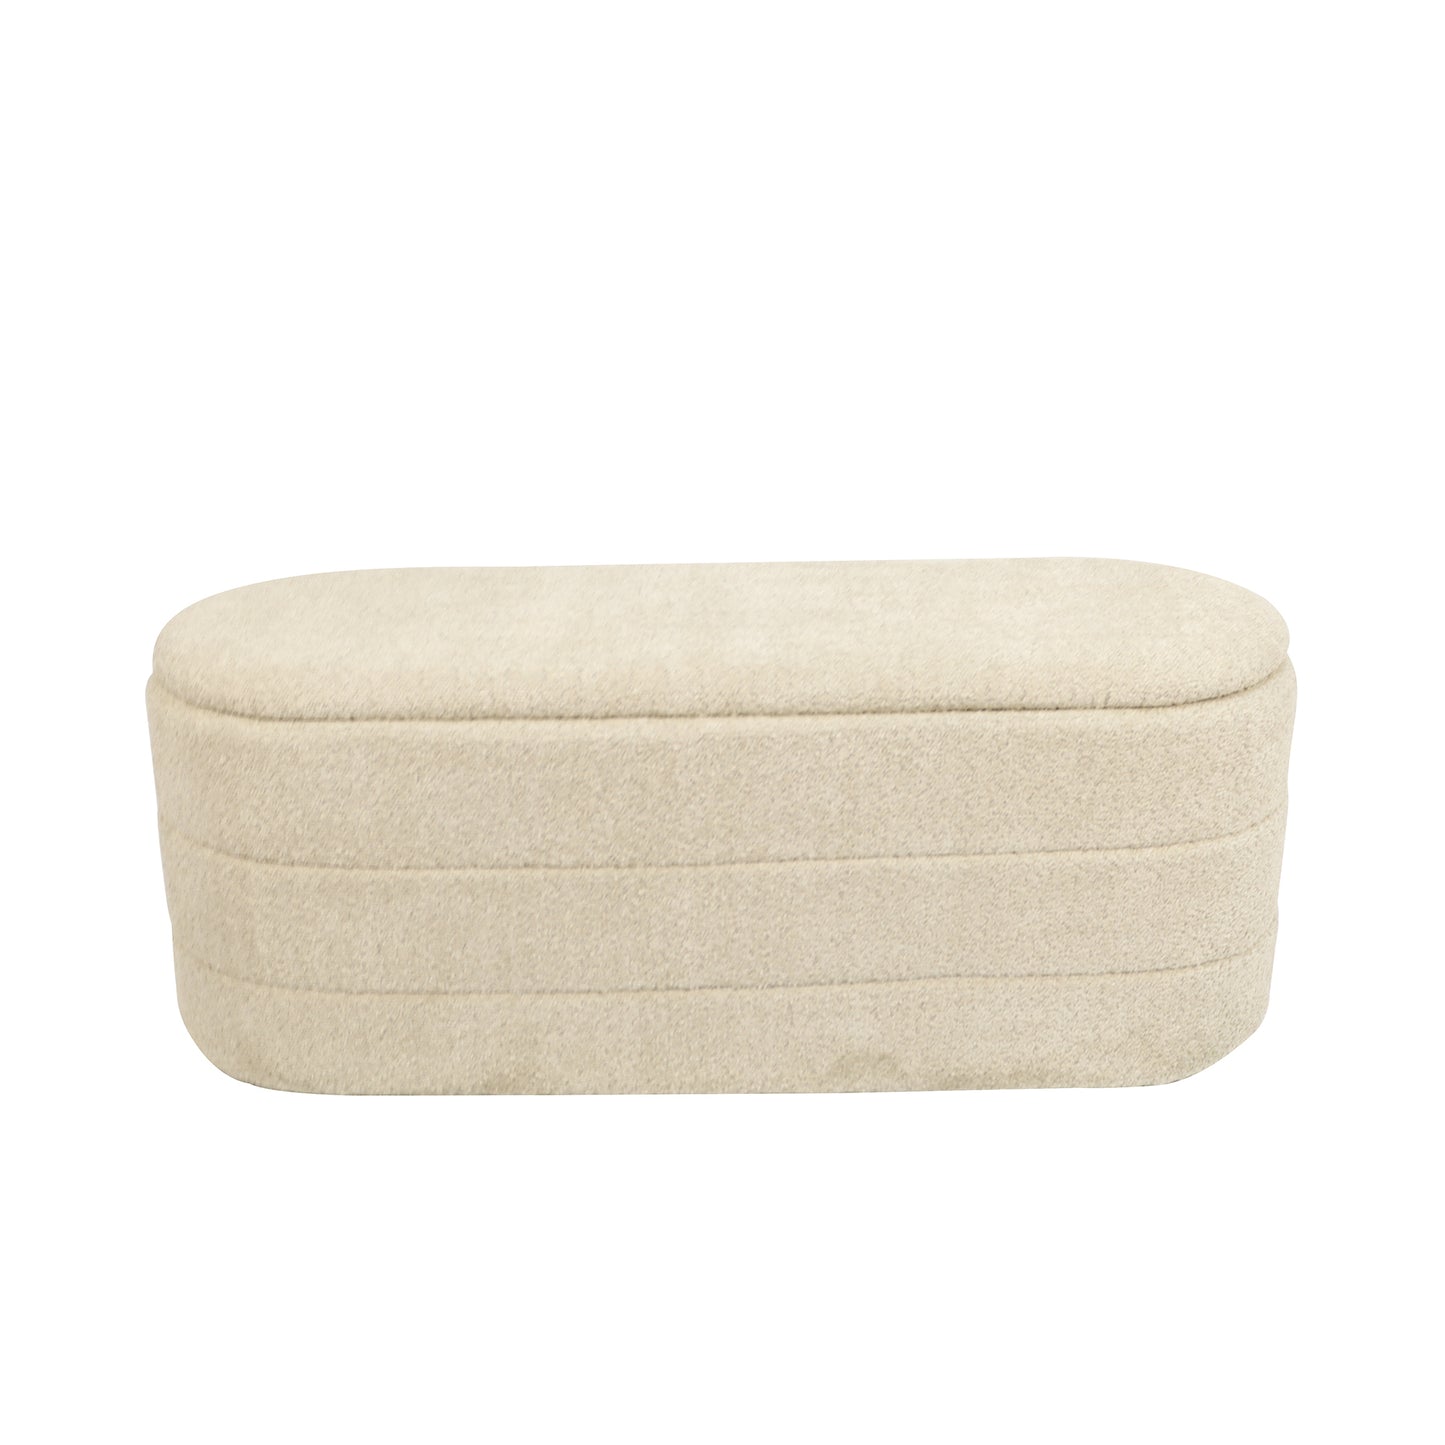 Faux Shearling Fabric Storage Bench With Storage Space BBS-467